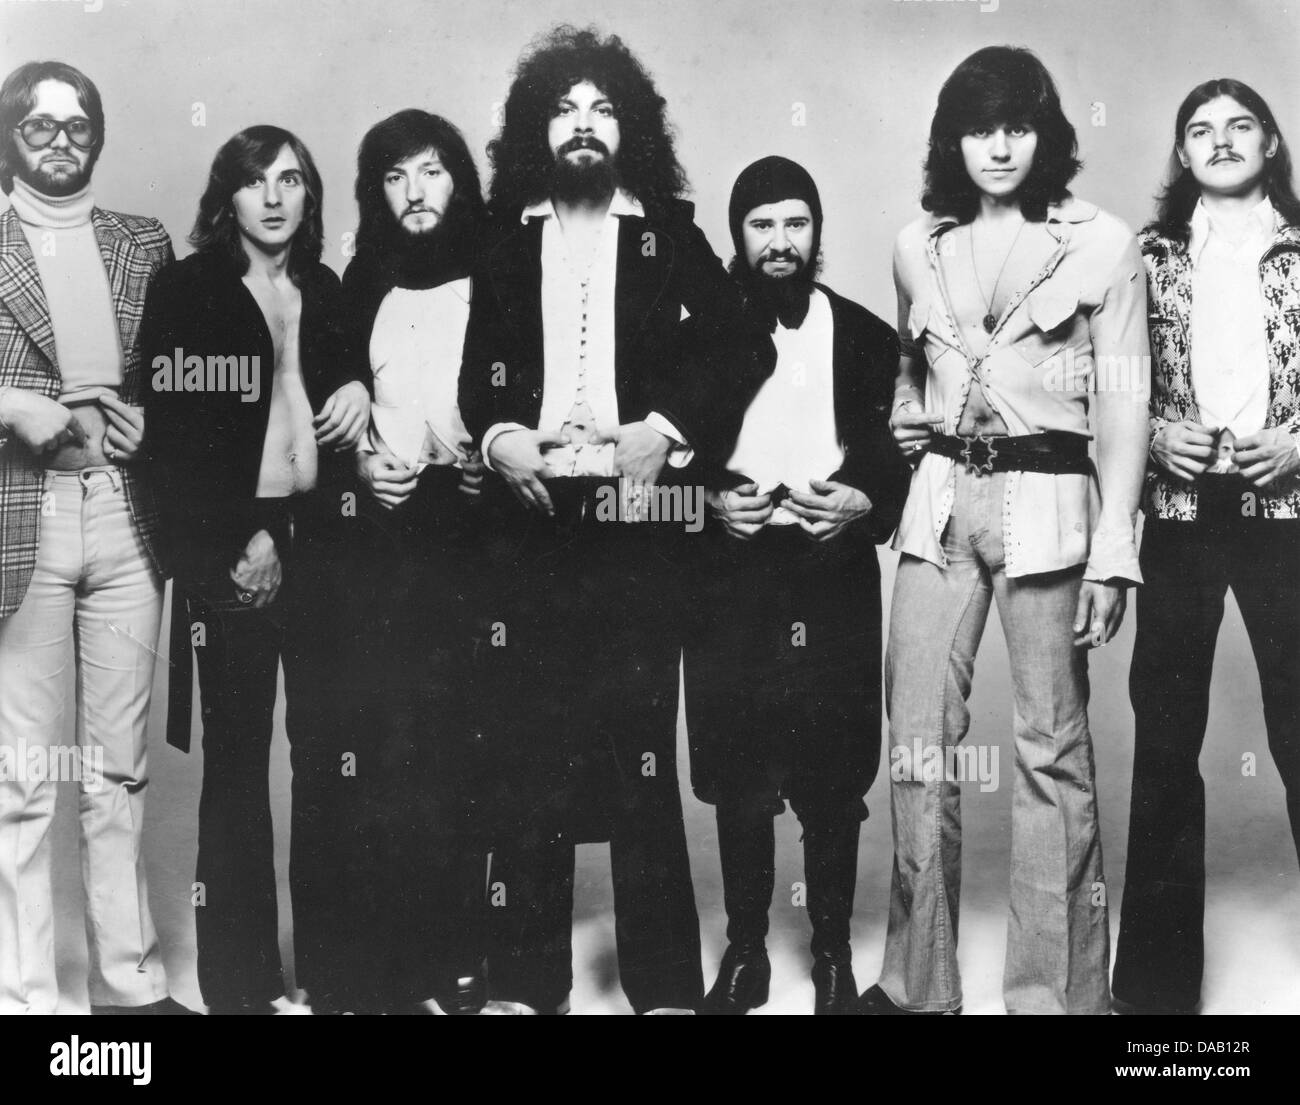 ELO Promotional photo of UK rock group about  1972 Stock Photo